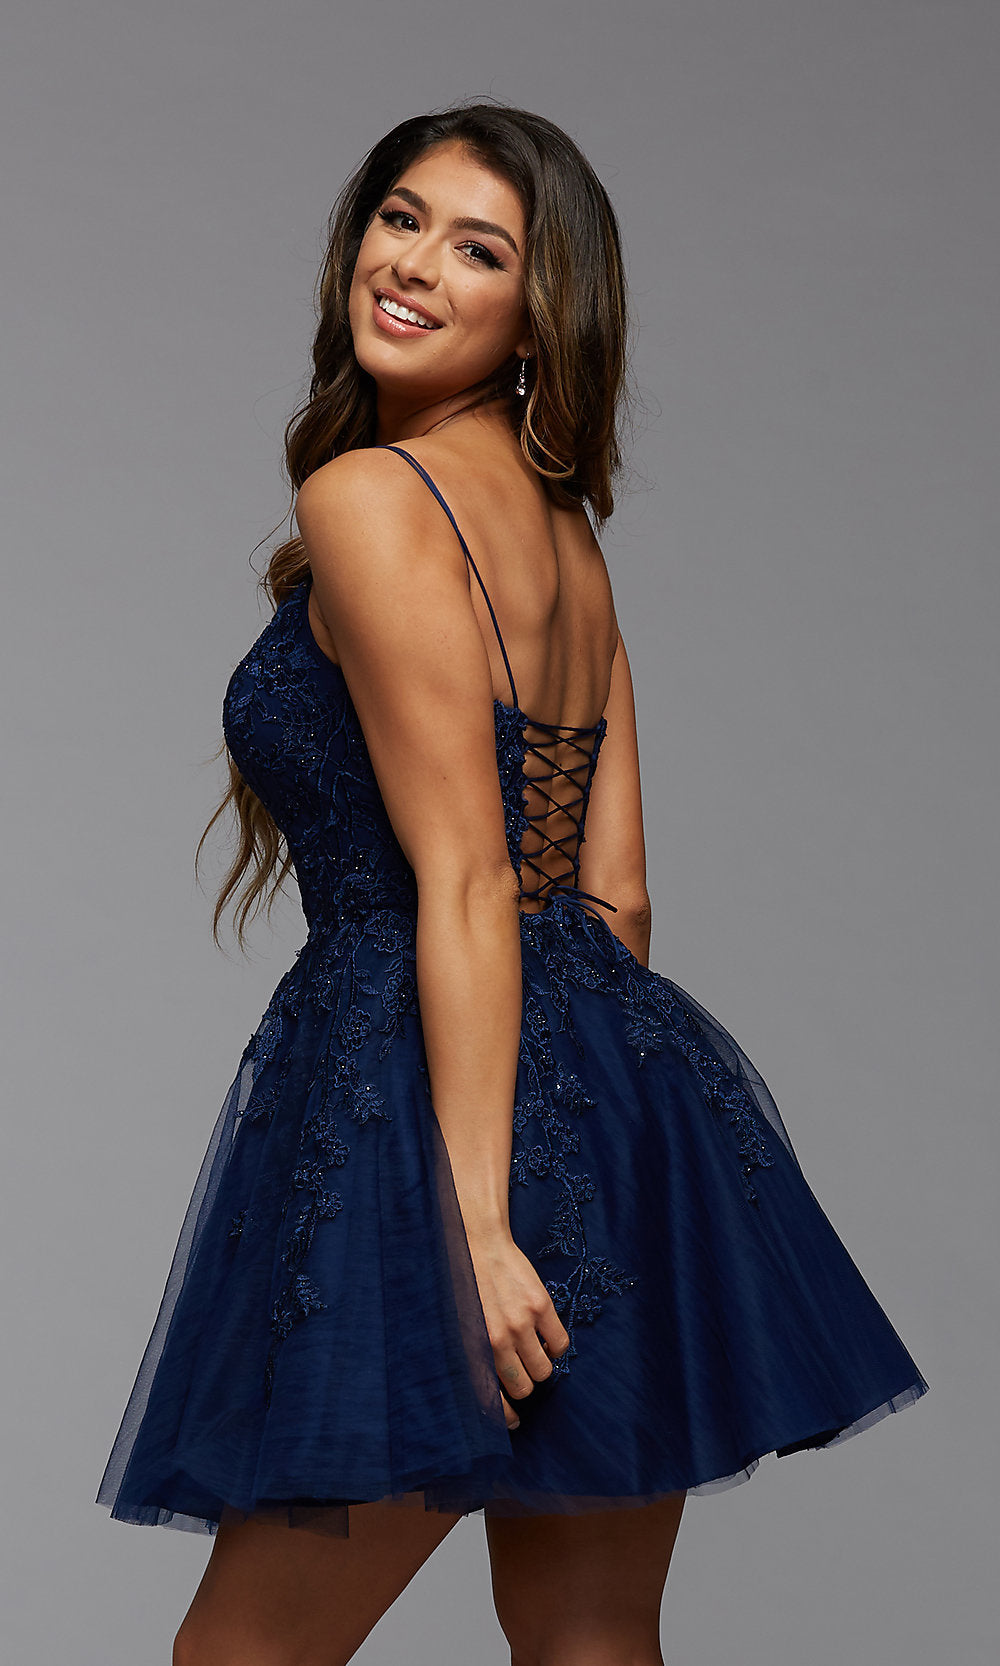 Short Babydoll Prom Dress with Corset - PromGirl